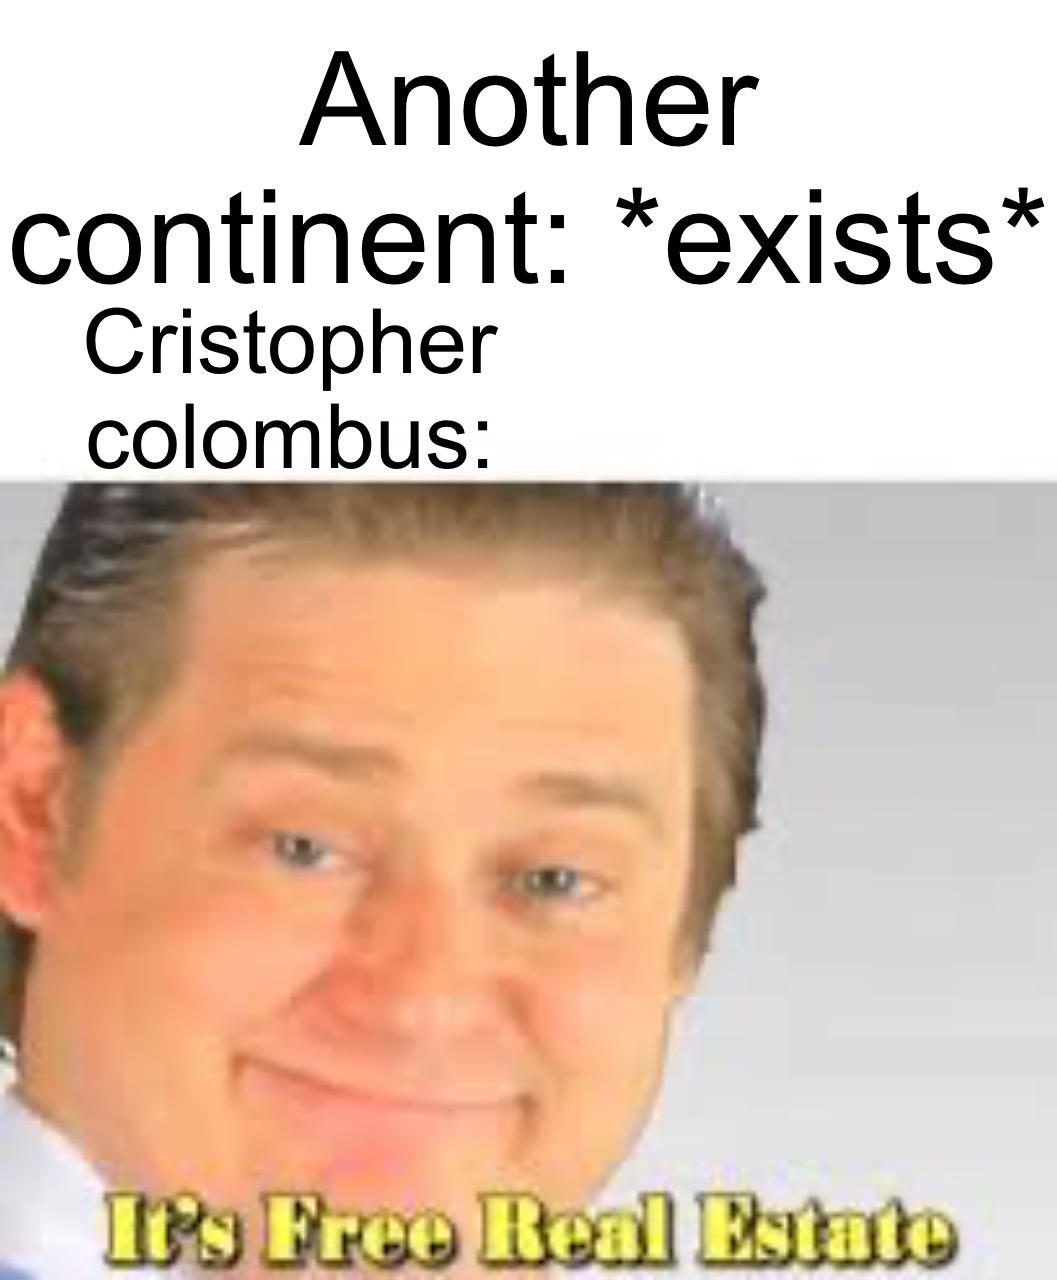 columbus day meme - eric free real estate - Another continent exists Cristopher colombus It's Free Real Estate